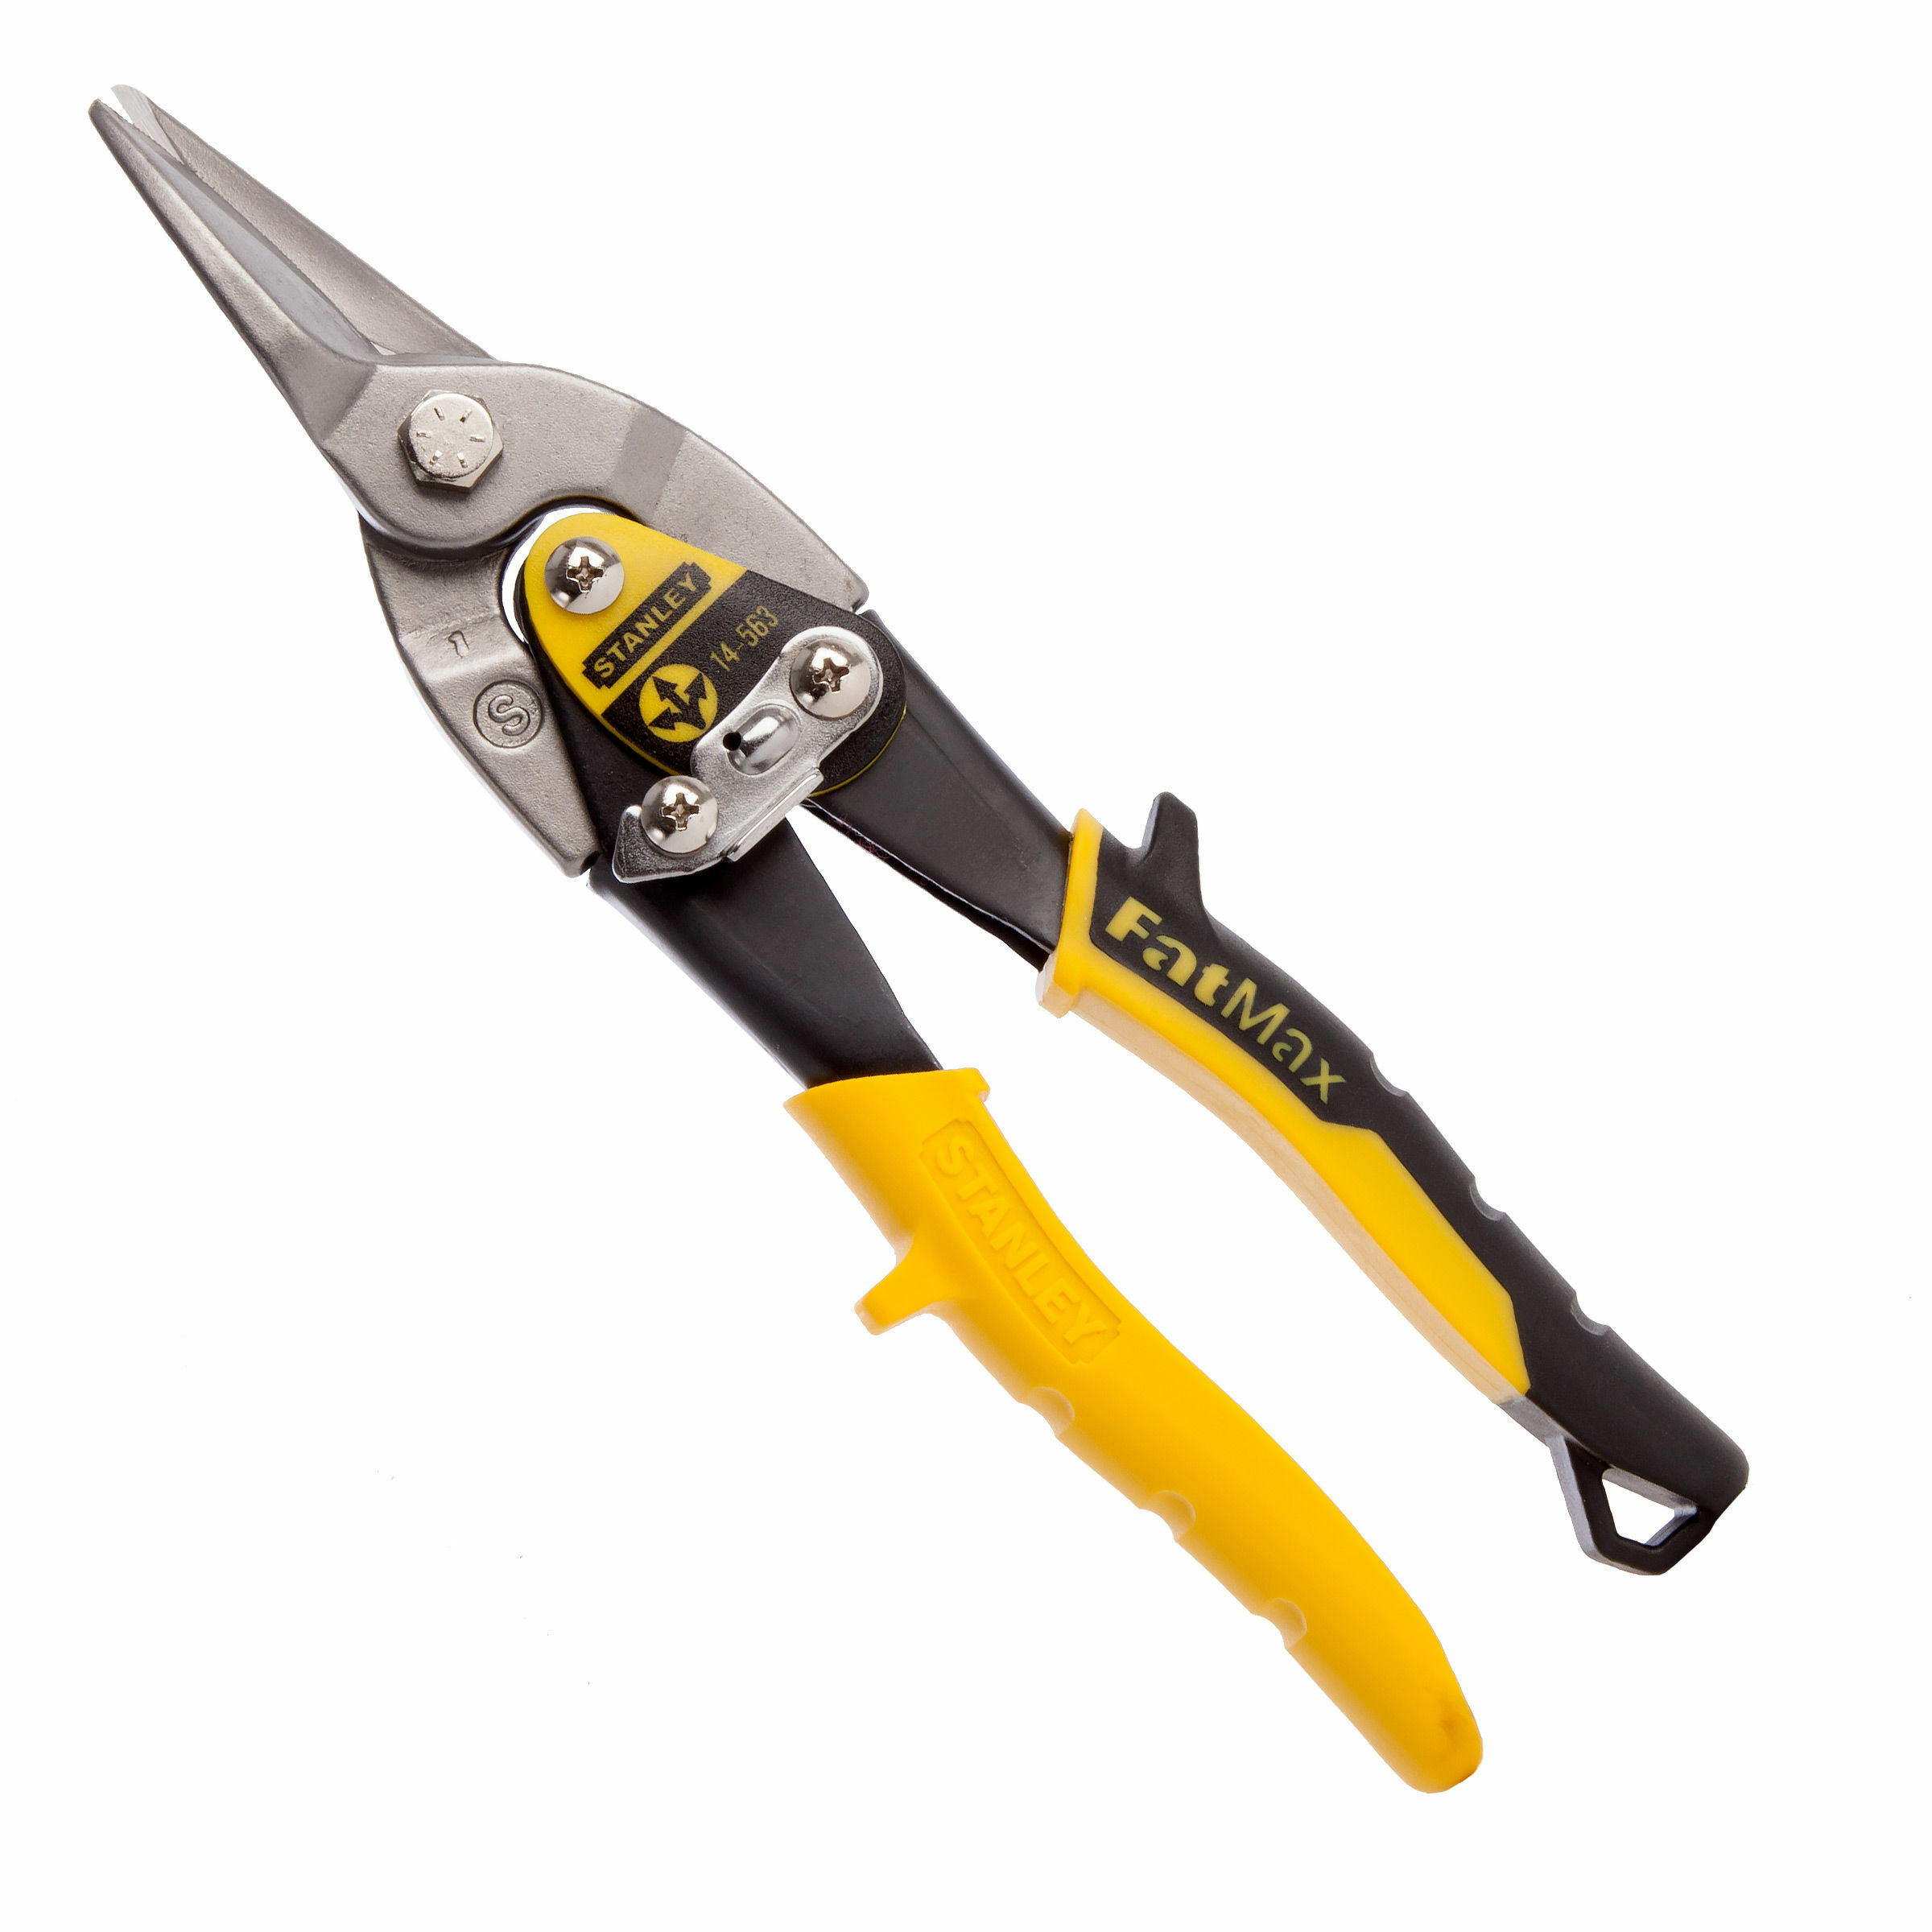 Fatmax Aviation Snip Compound Action Snips 250mm Stanley - 2